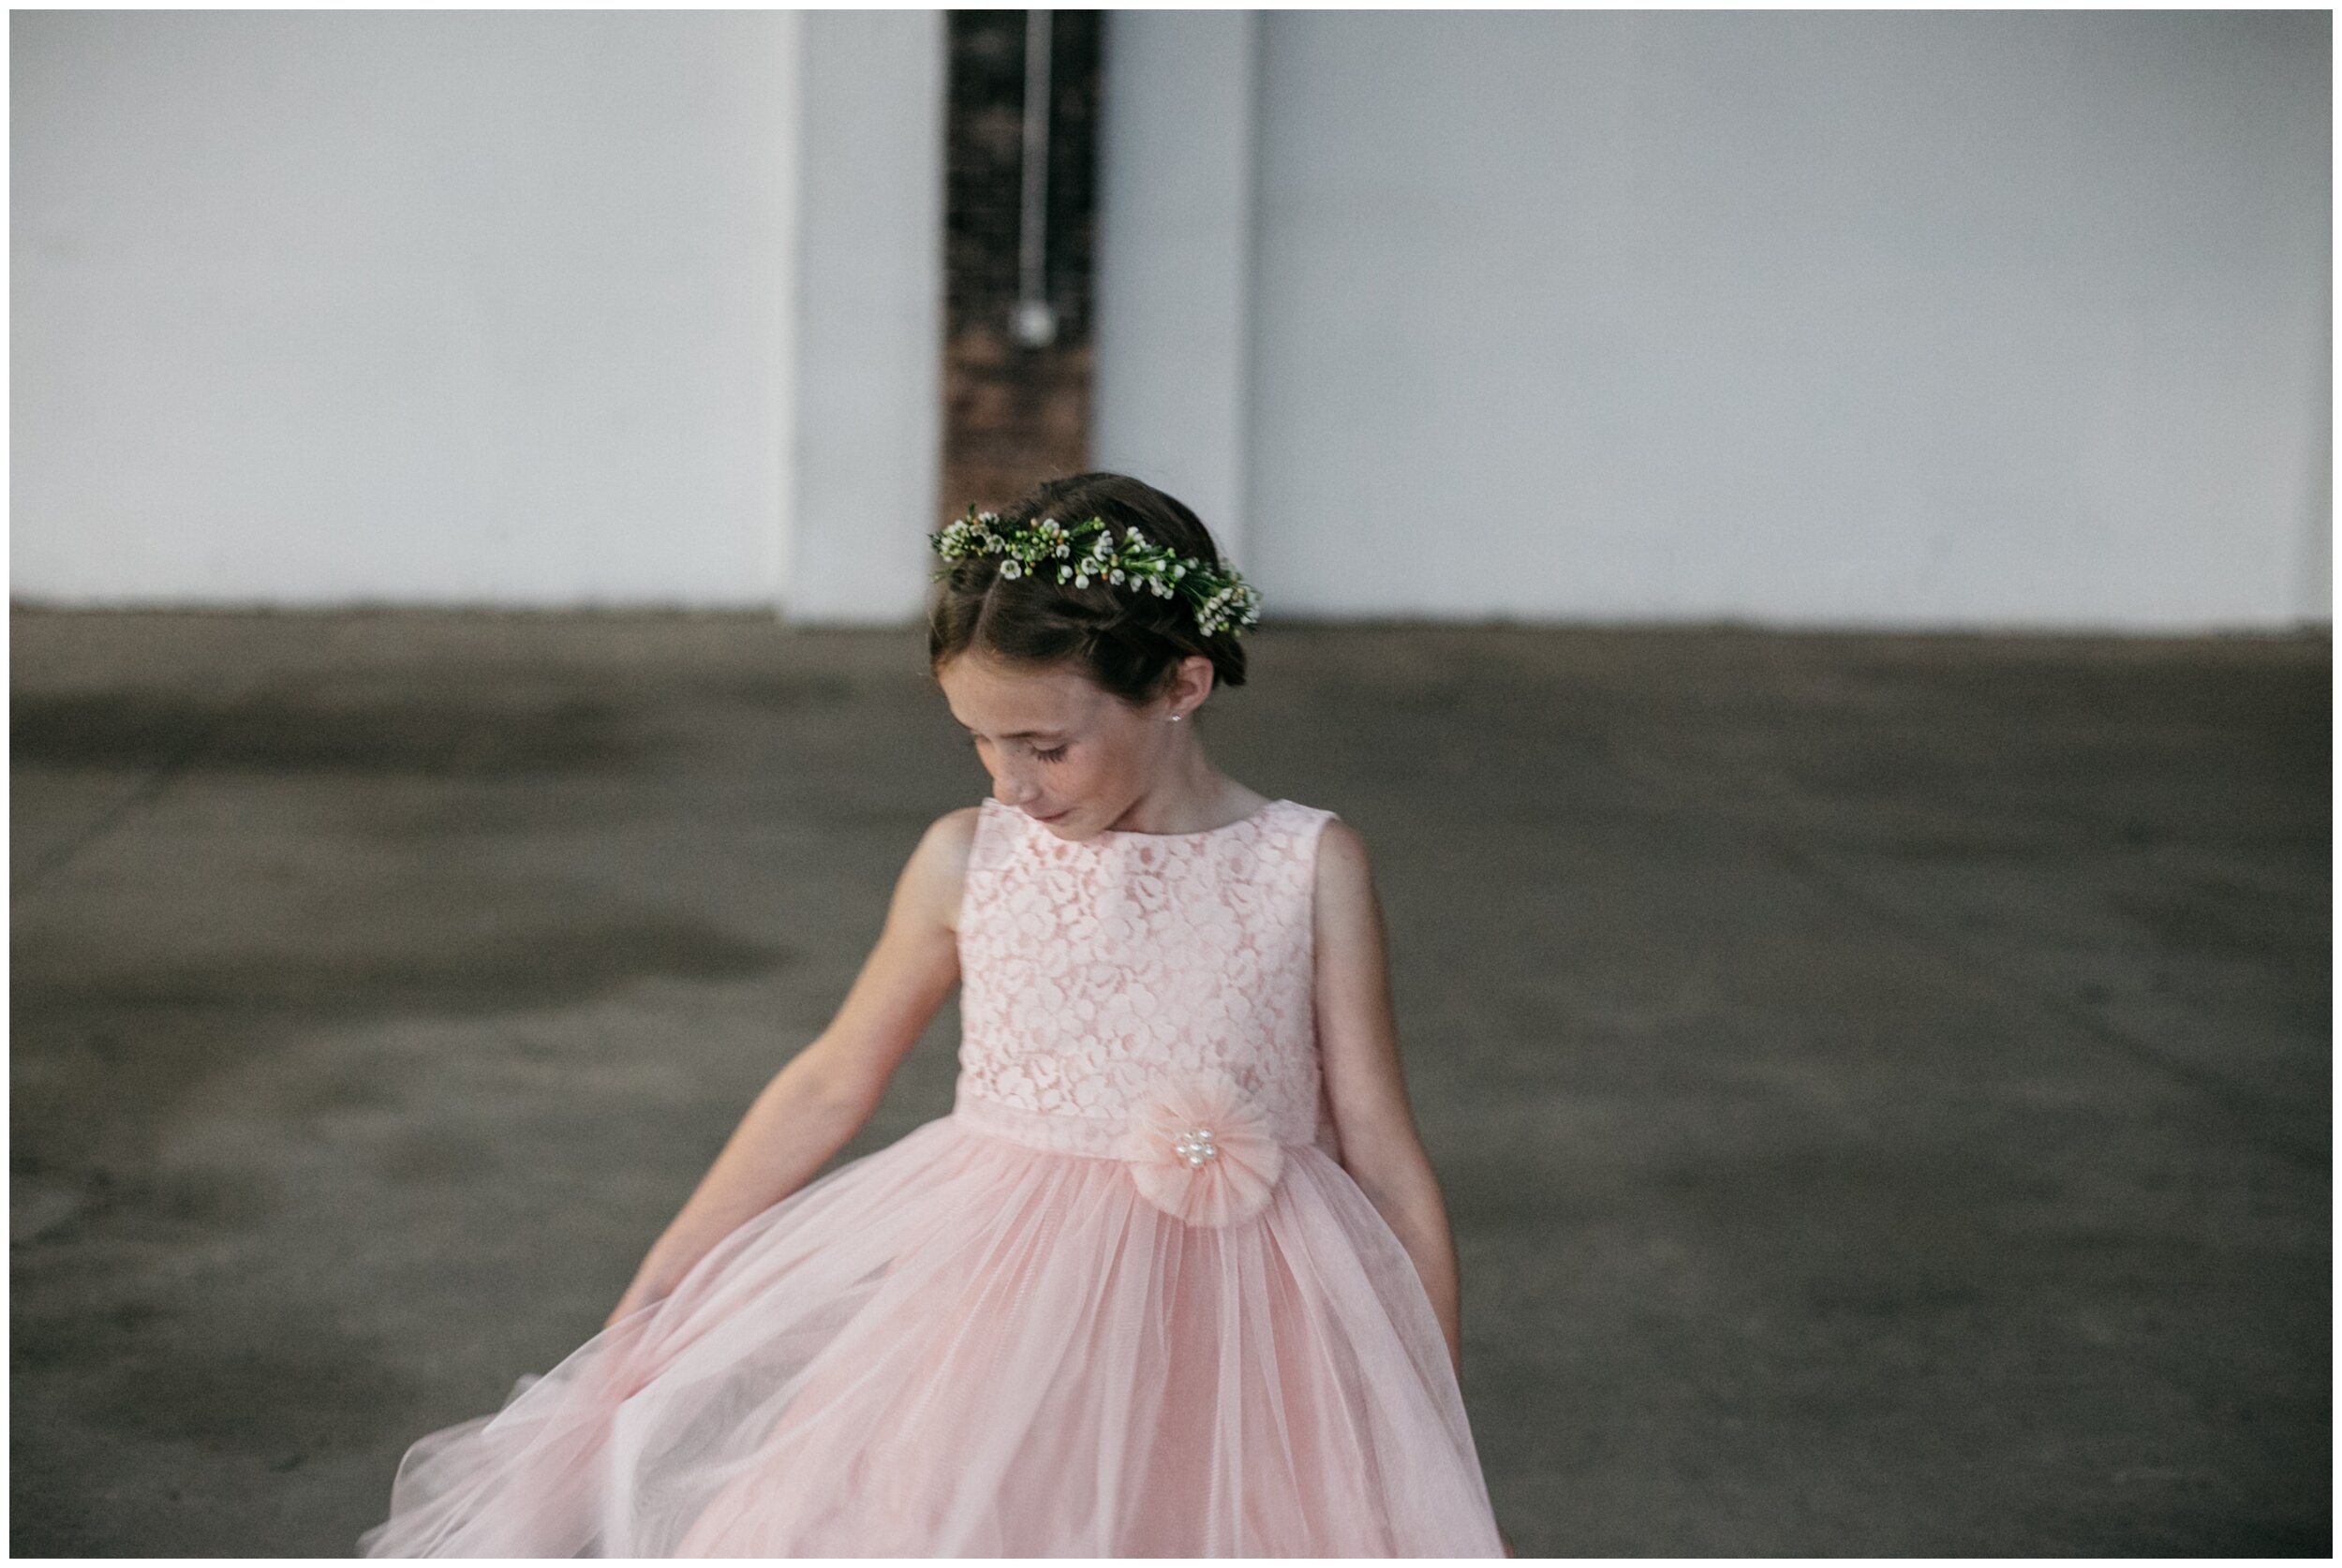 Flower girl playing with pink tulle dress